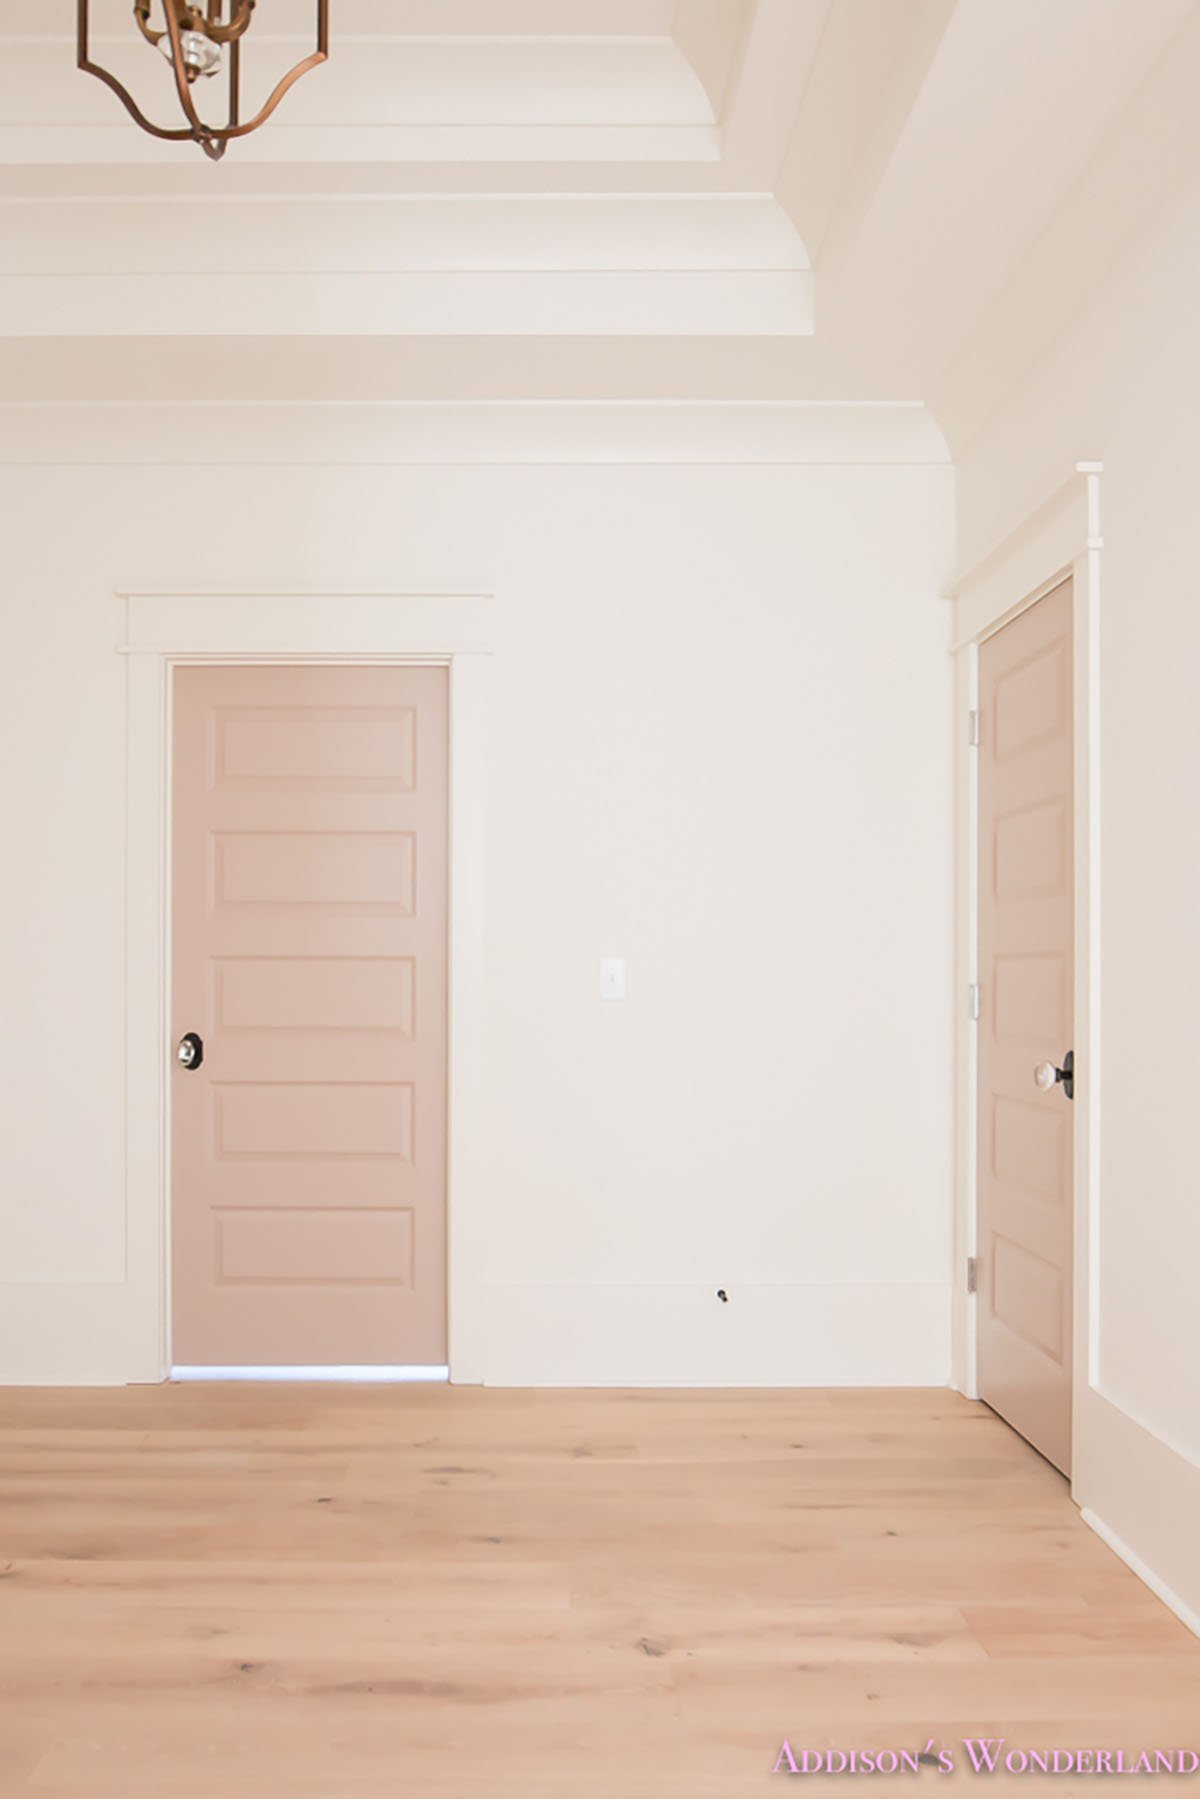 Sherwin Williams Doeskin painted on the doors as an accent of a girls playroom.